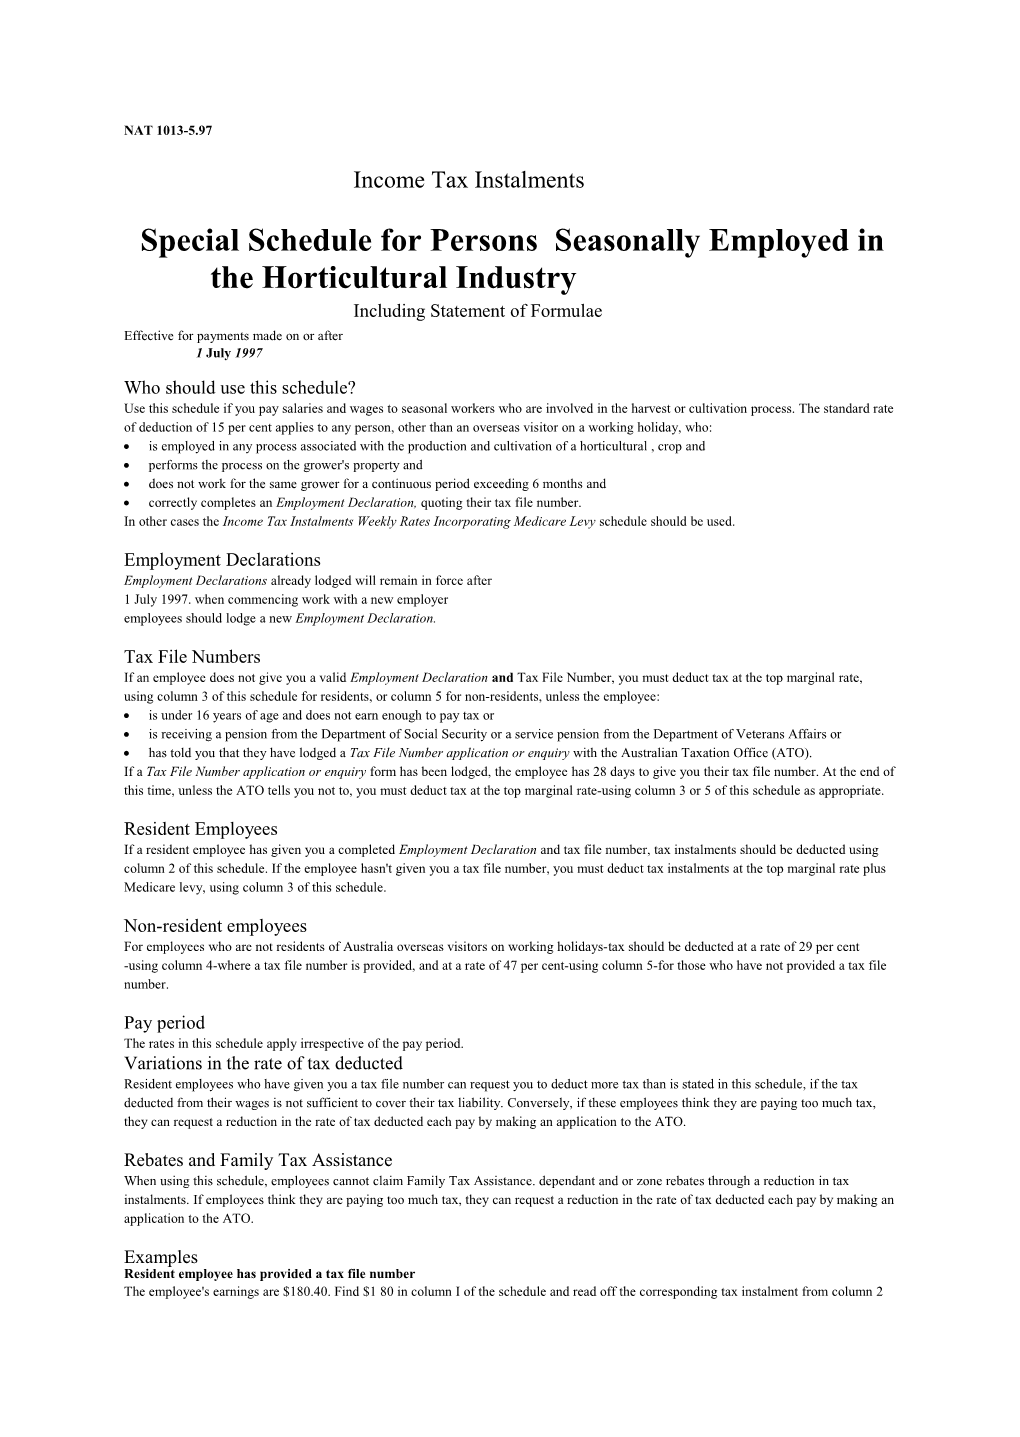 Special Schedule for Persons Seasonally Employed in the Horticultural Industry